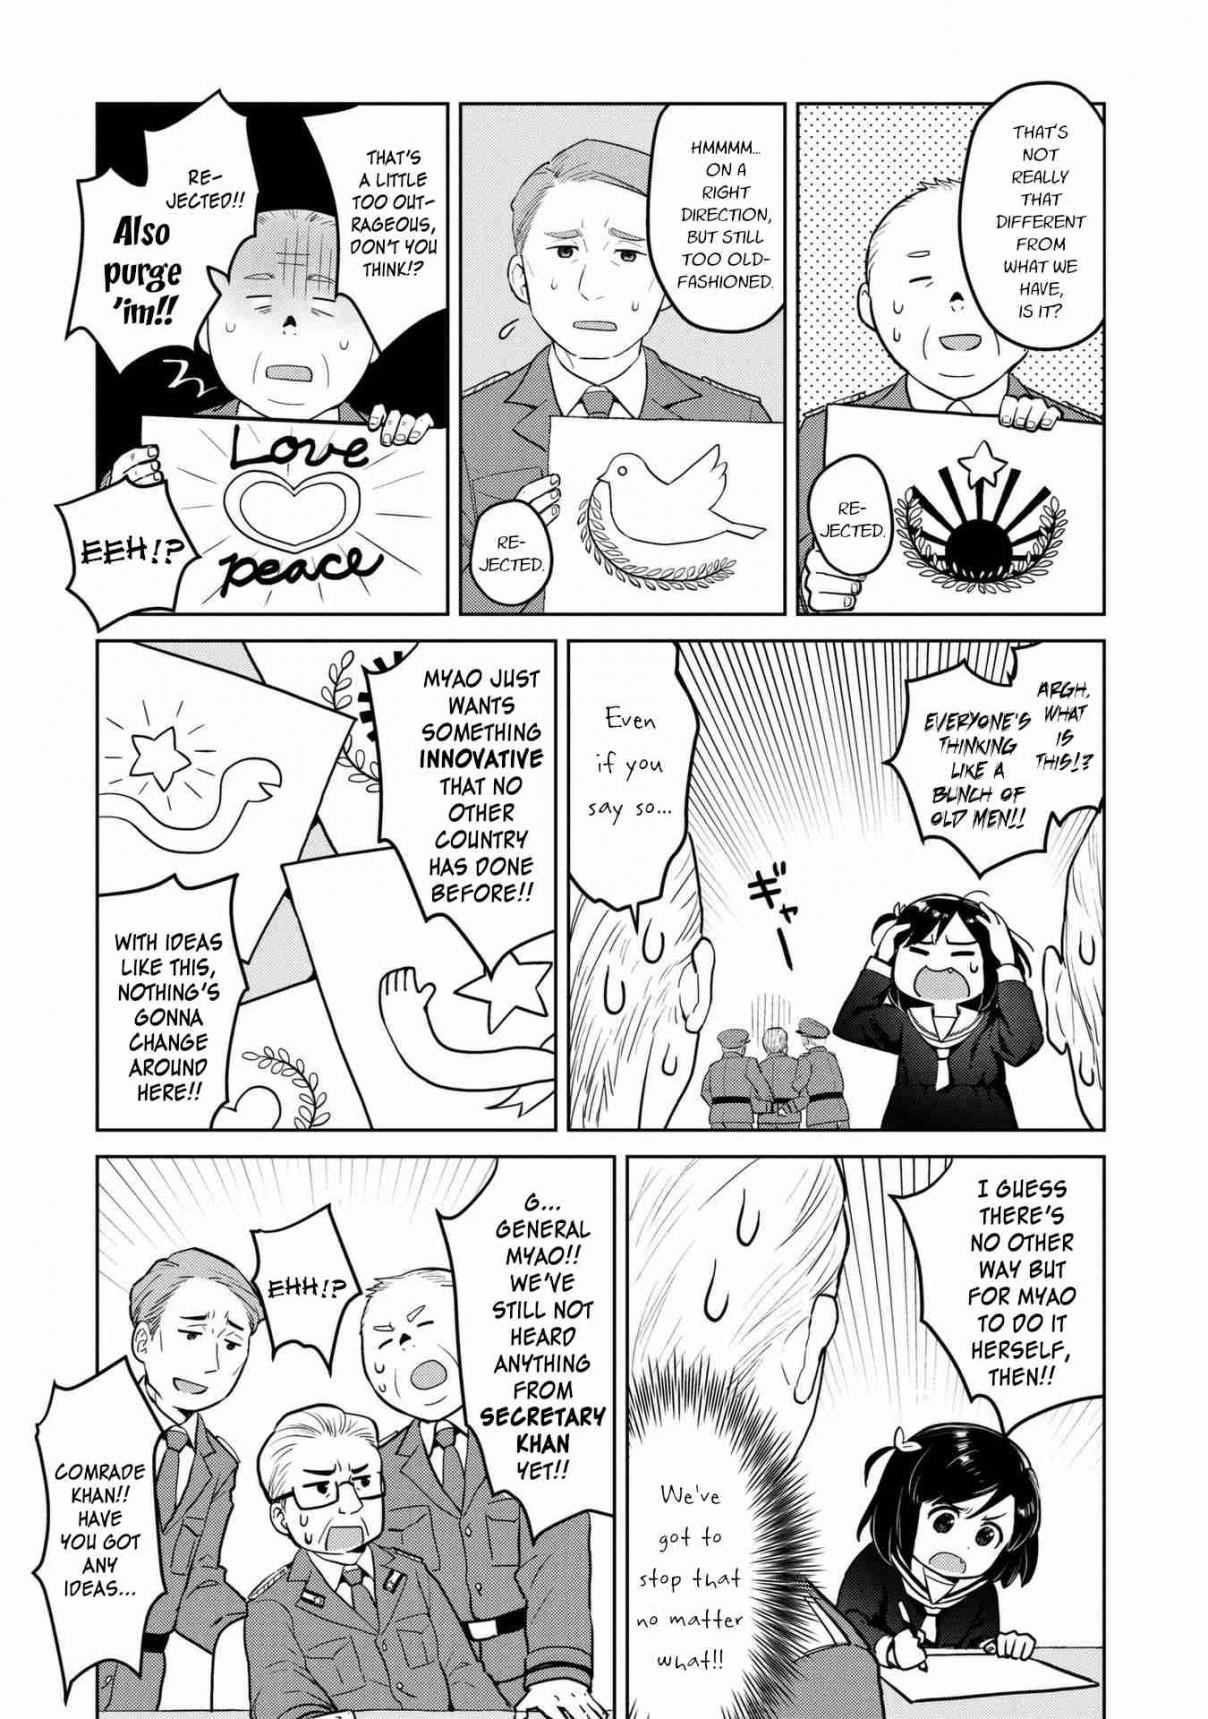 Oh, Our General Myao Vol. 1 Ch. 4 In Which Myao Changes the Flag